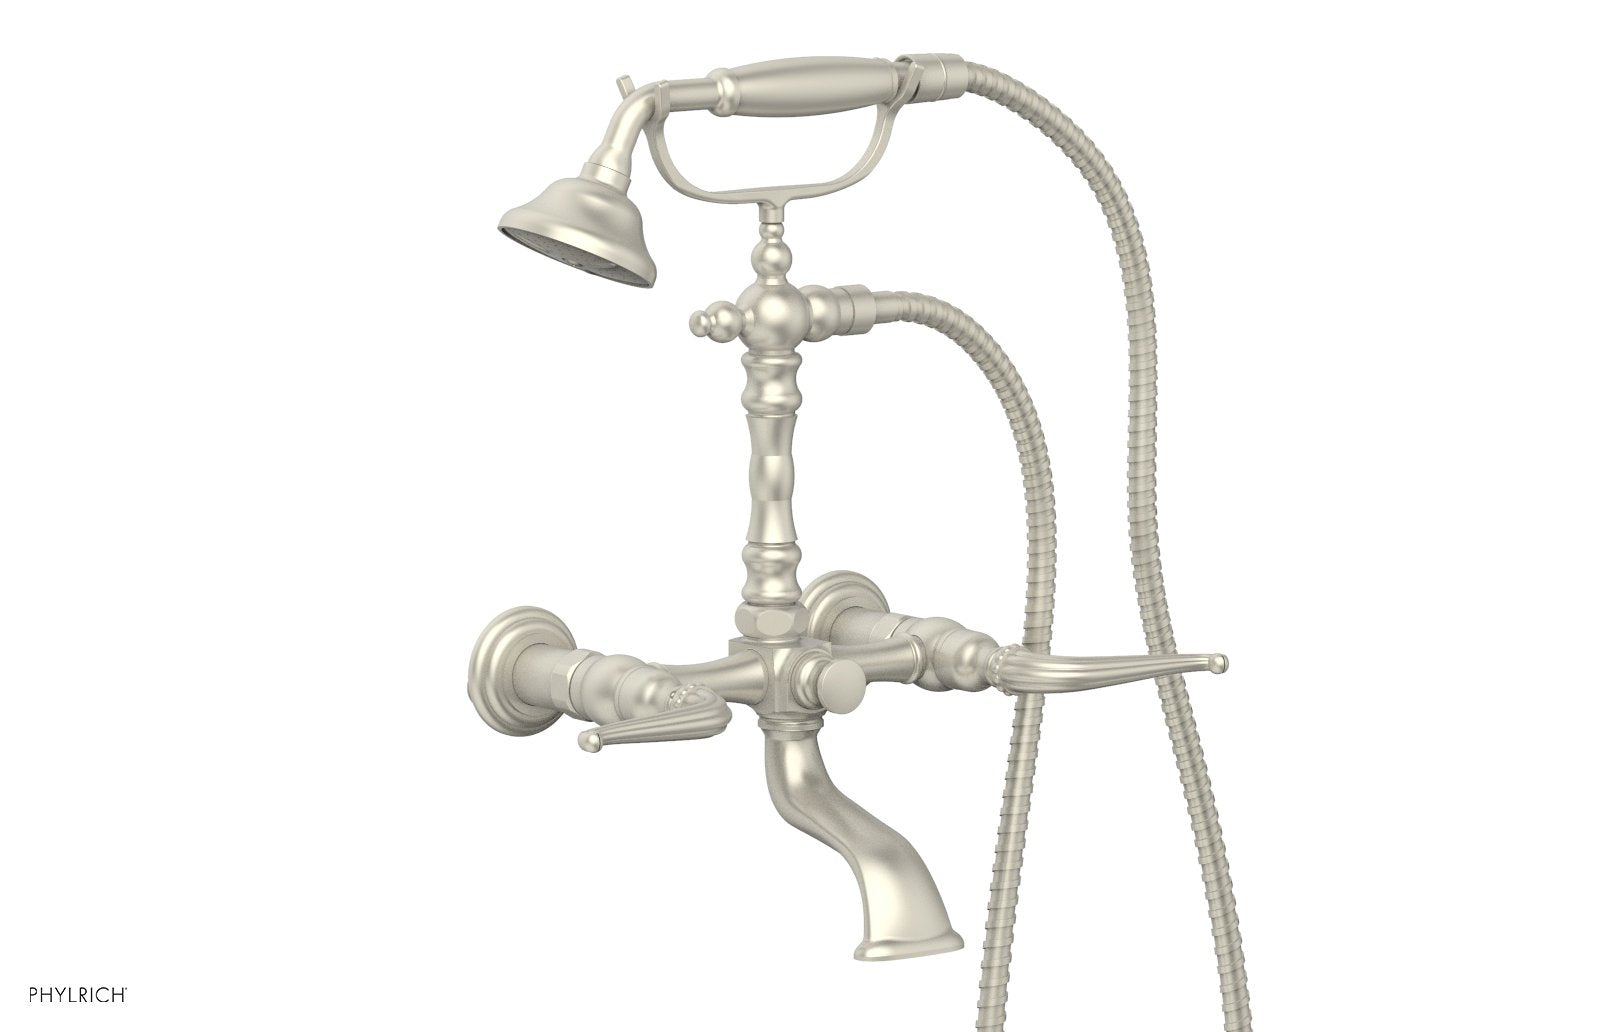 Phylrich GEORGIAN & BARCELONA Exposed Tub & Hand Shower - Lever Handle